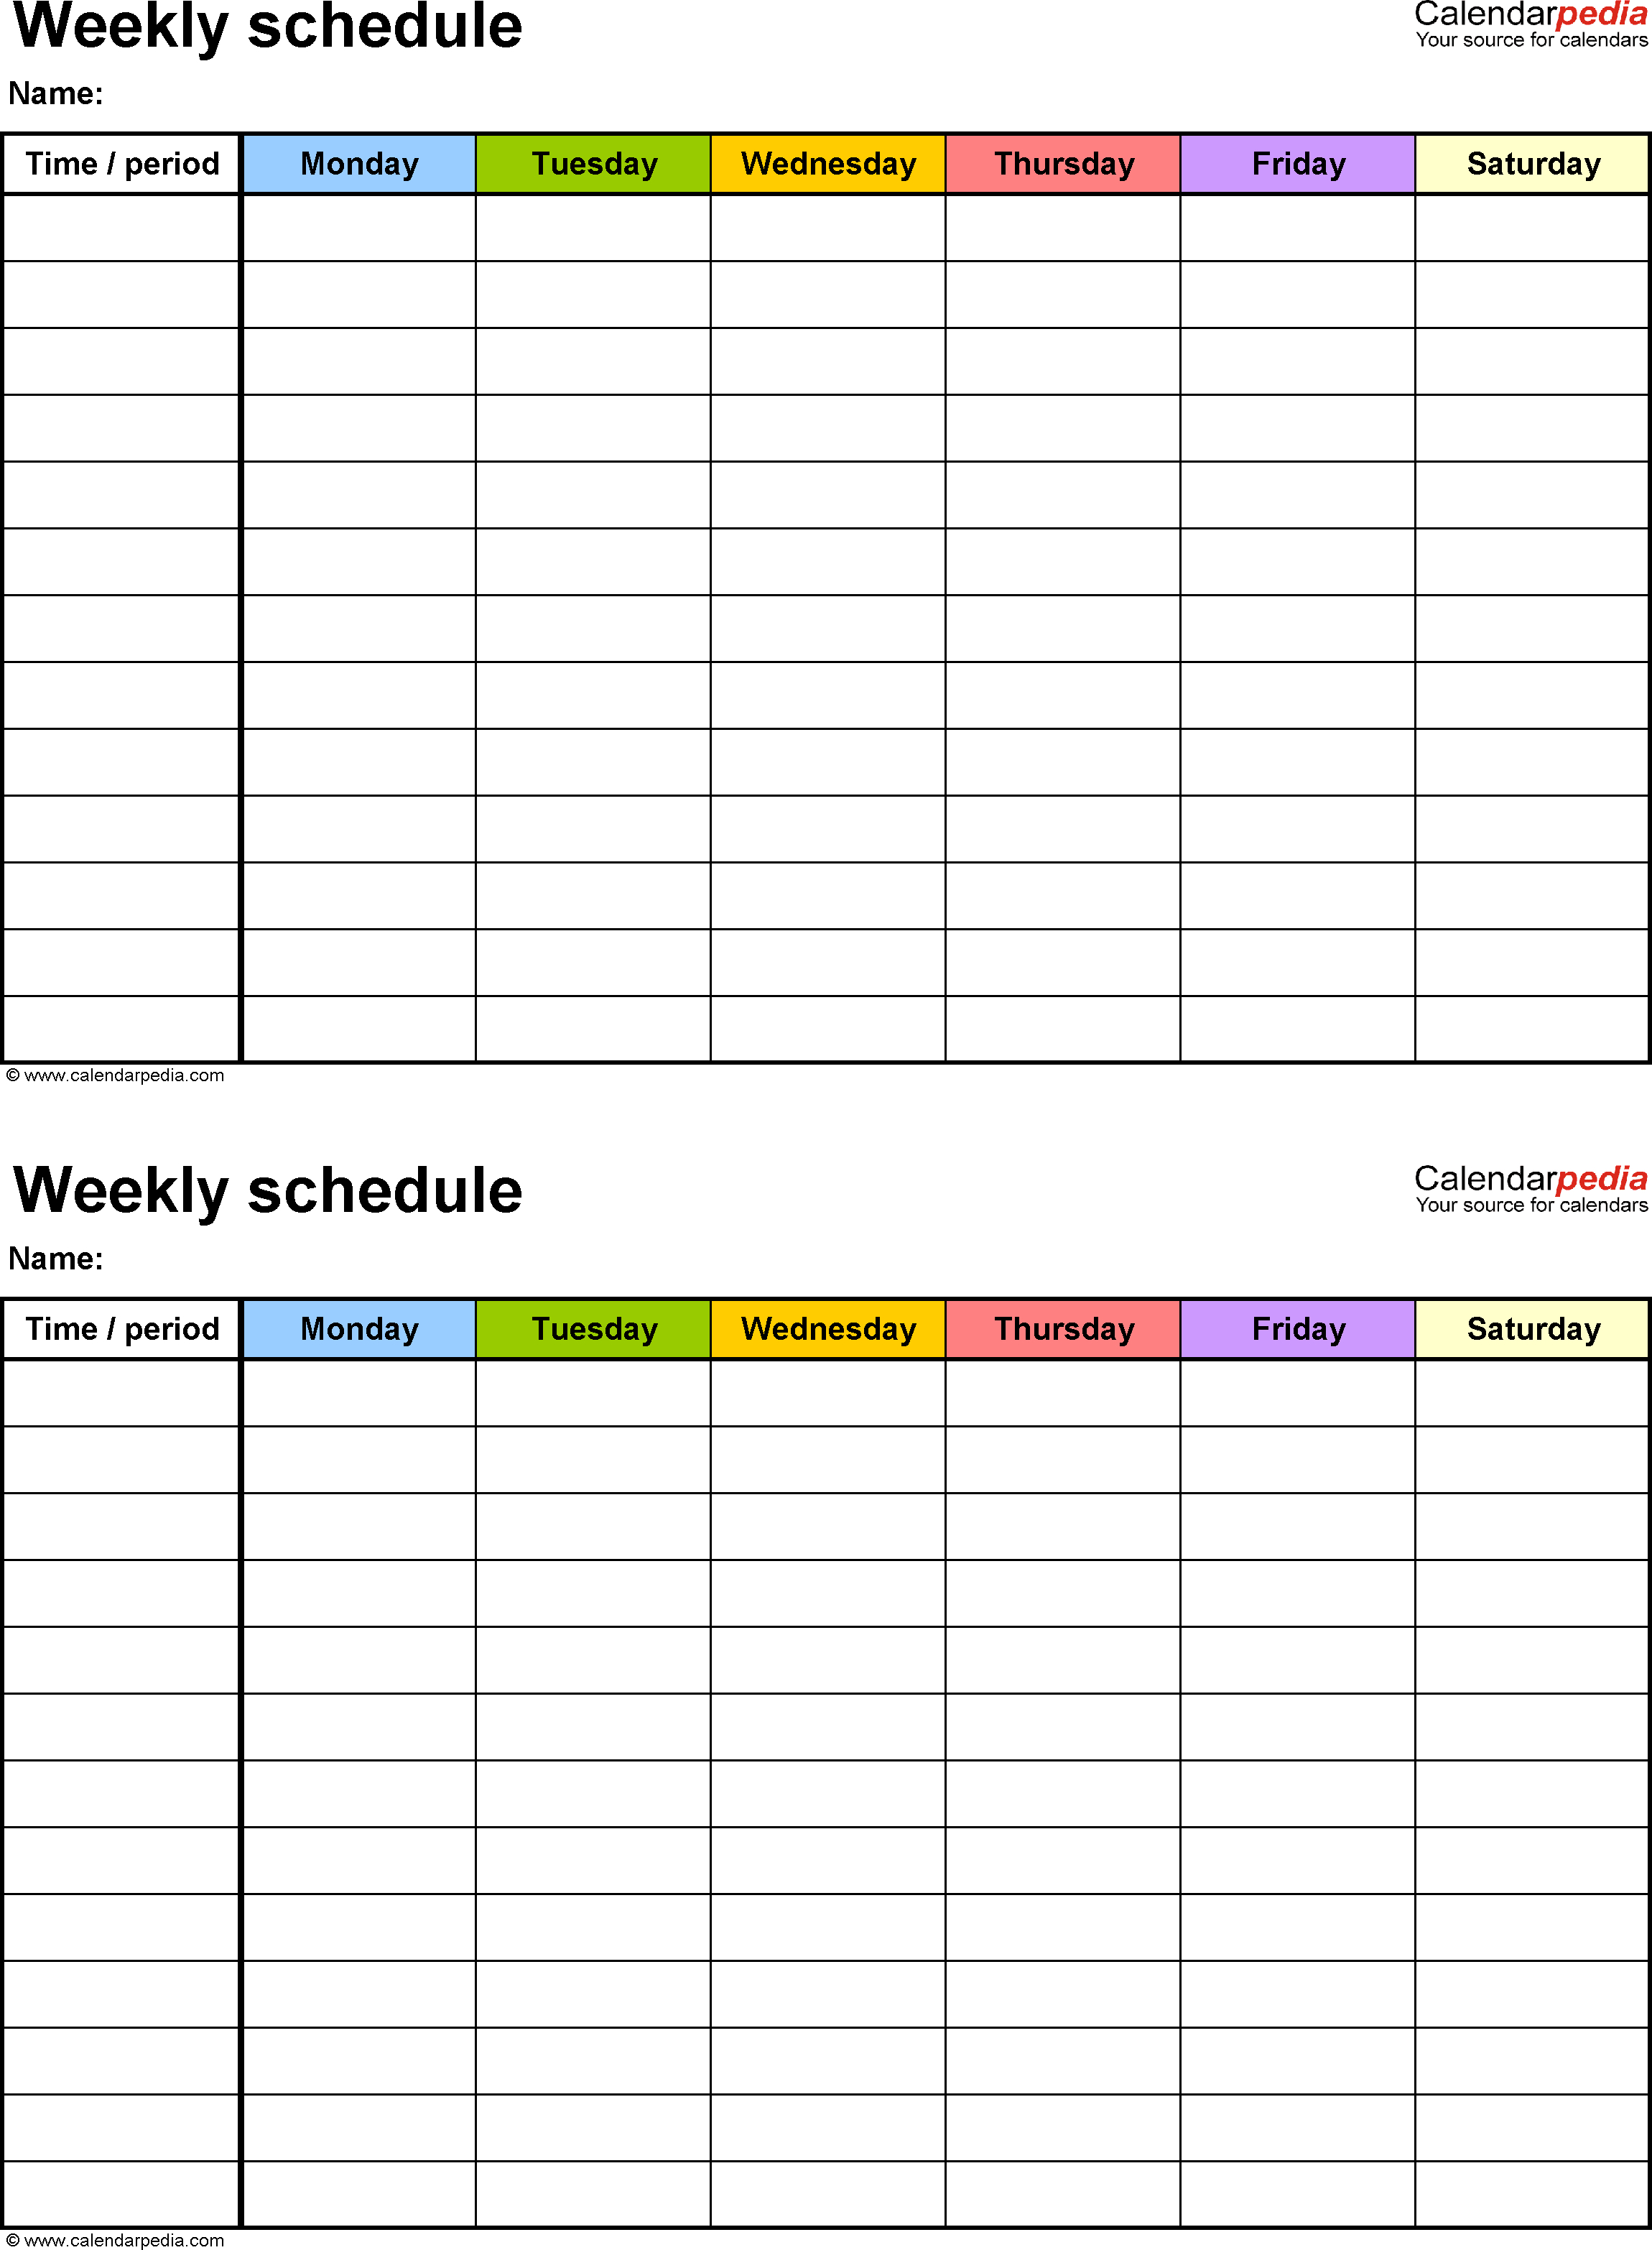 Free Weekly Schedule Templates For Word - 18 Templates and Employee Schedule Templates